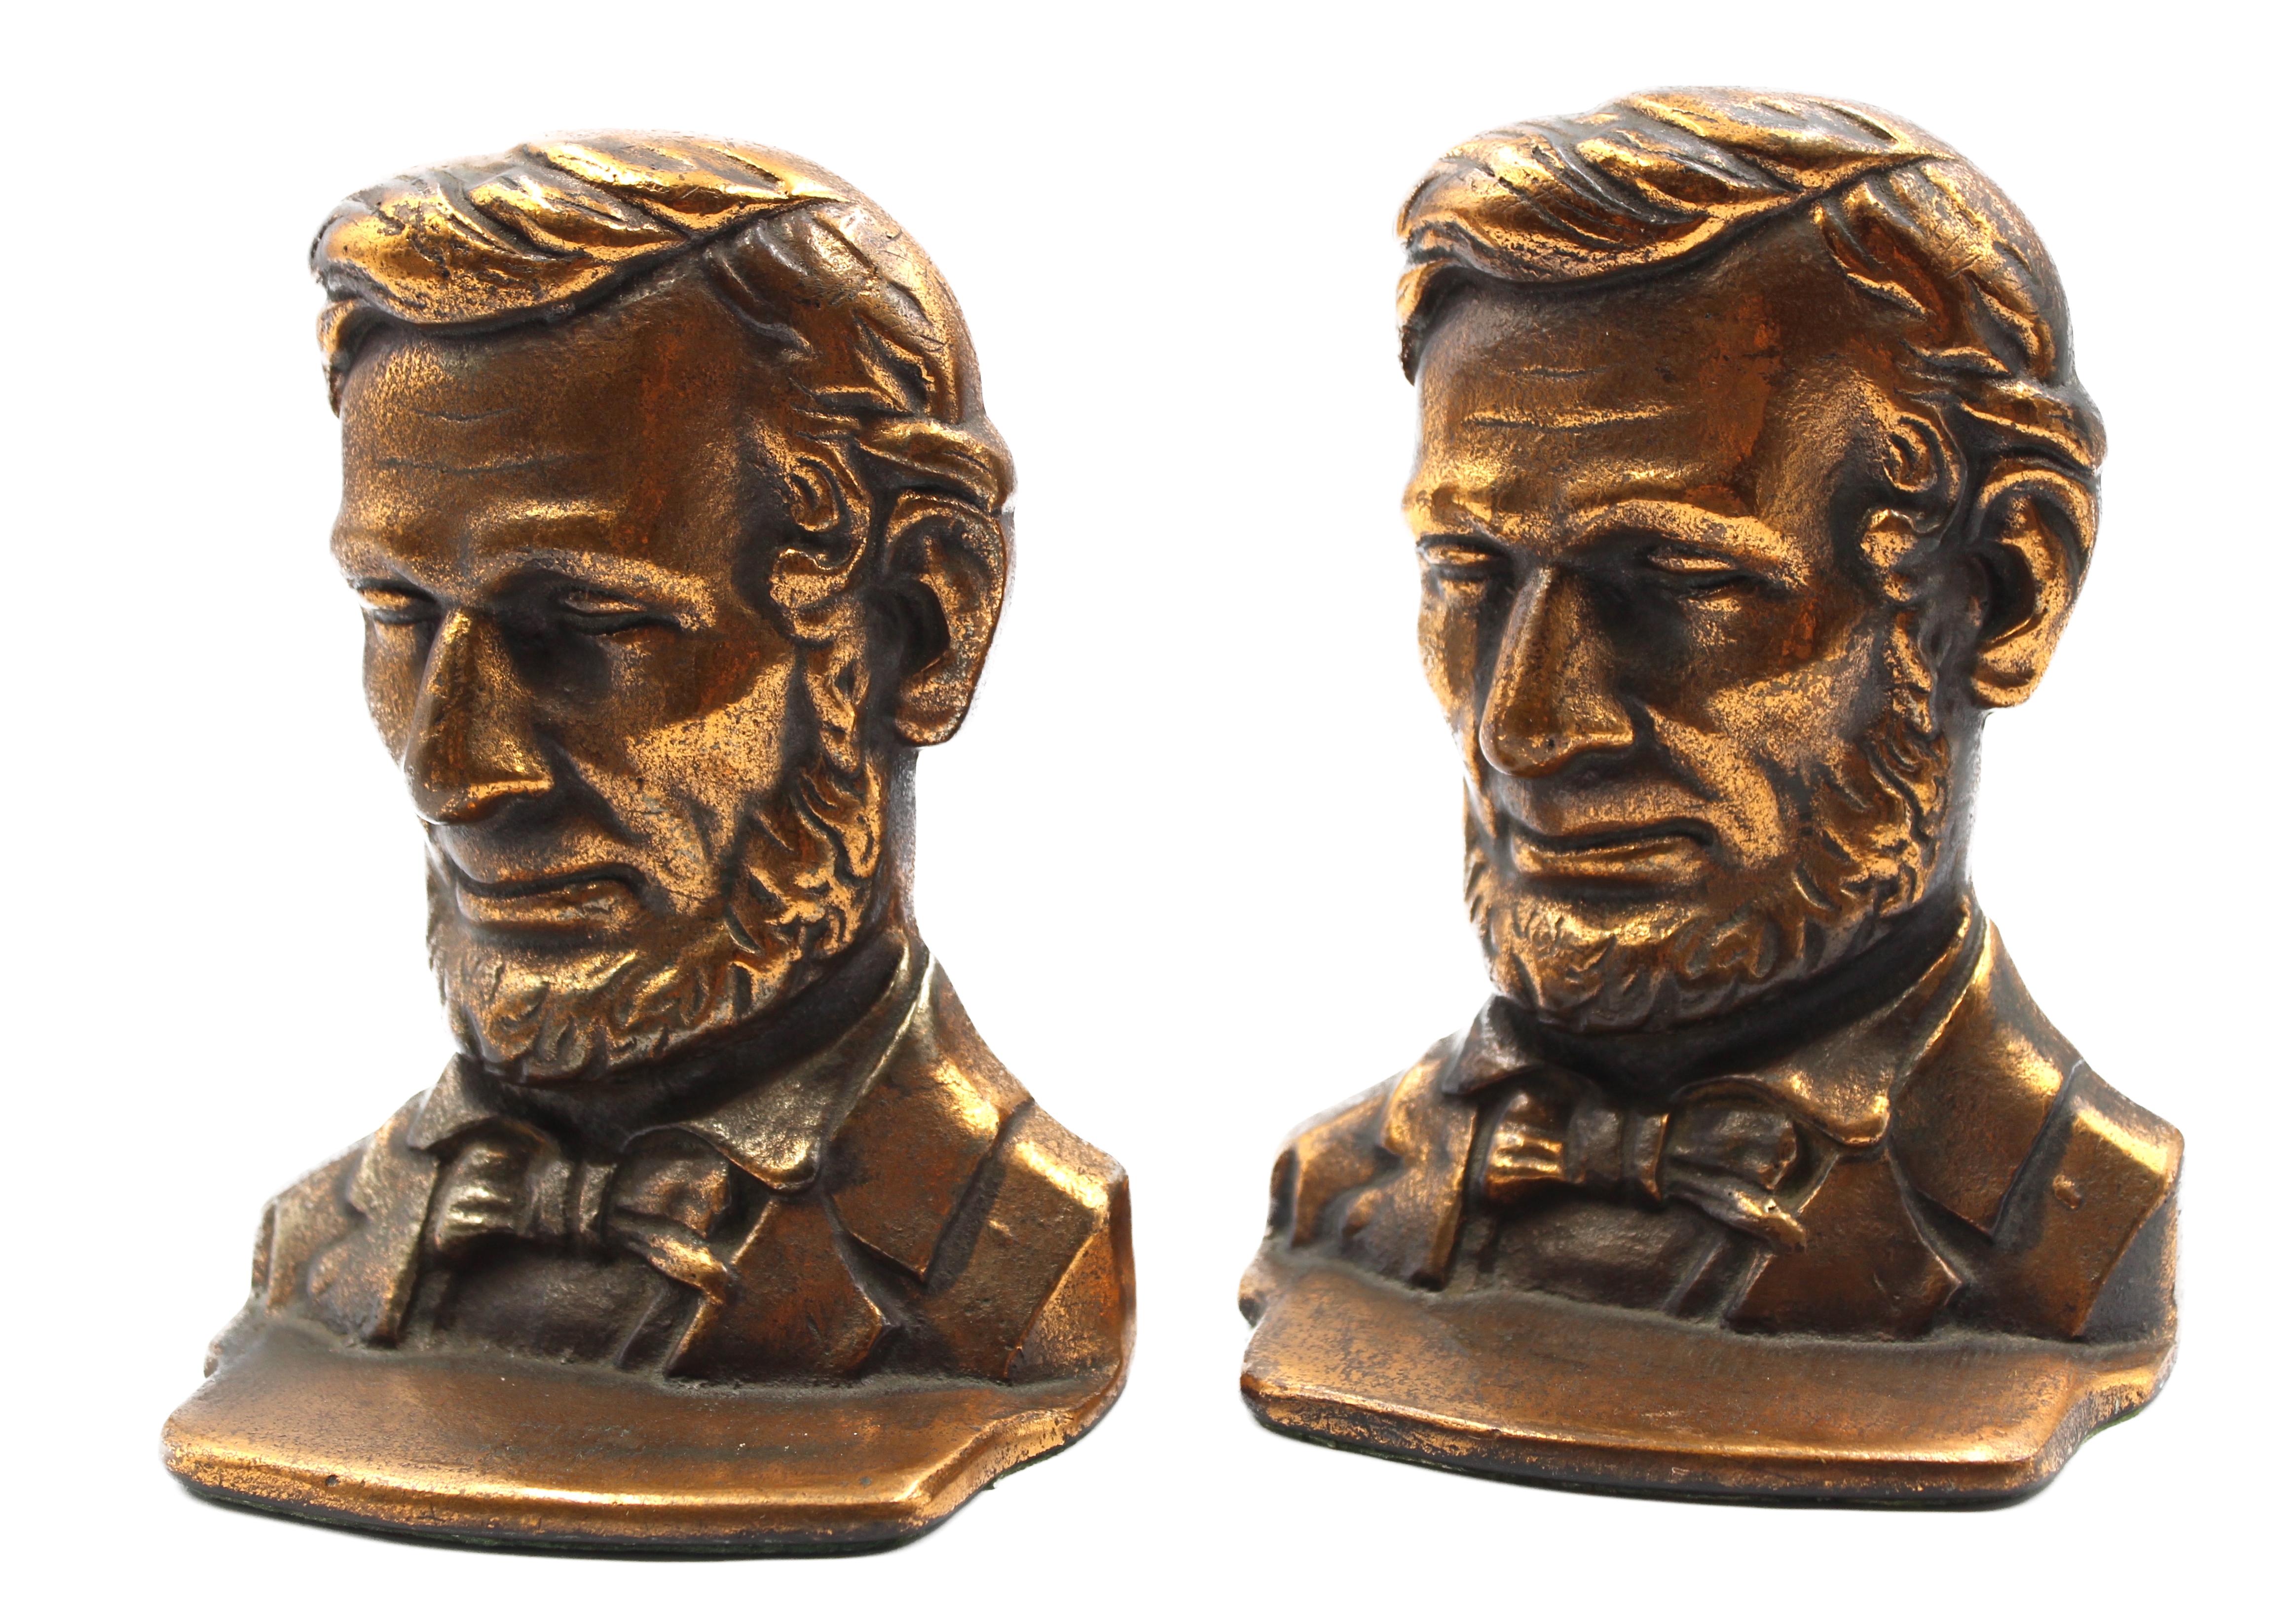 Offered is a pair of vintage Abraham Lincoln iron bust bookends. The pair feature the likeness of Abraham Lincoln with detailed facial features and formal attire. 

The Lincoln bust is modeled after the 1887 full-length standing bronze by Augustus